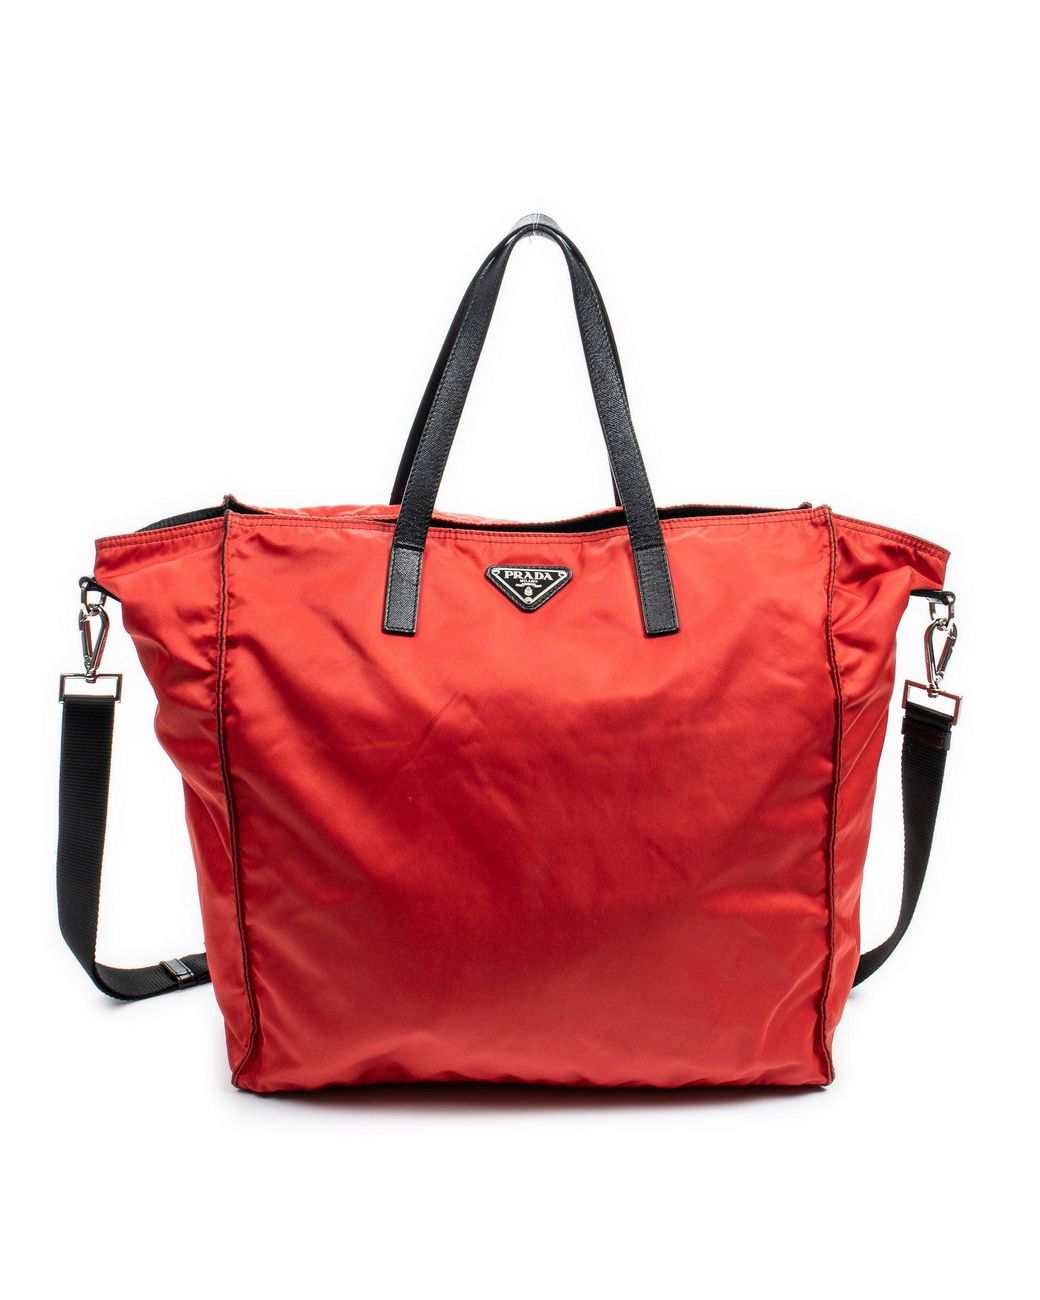 Prada Large Nylon Open Shopping Tote in Red | Lyst